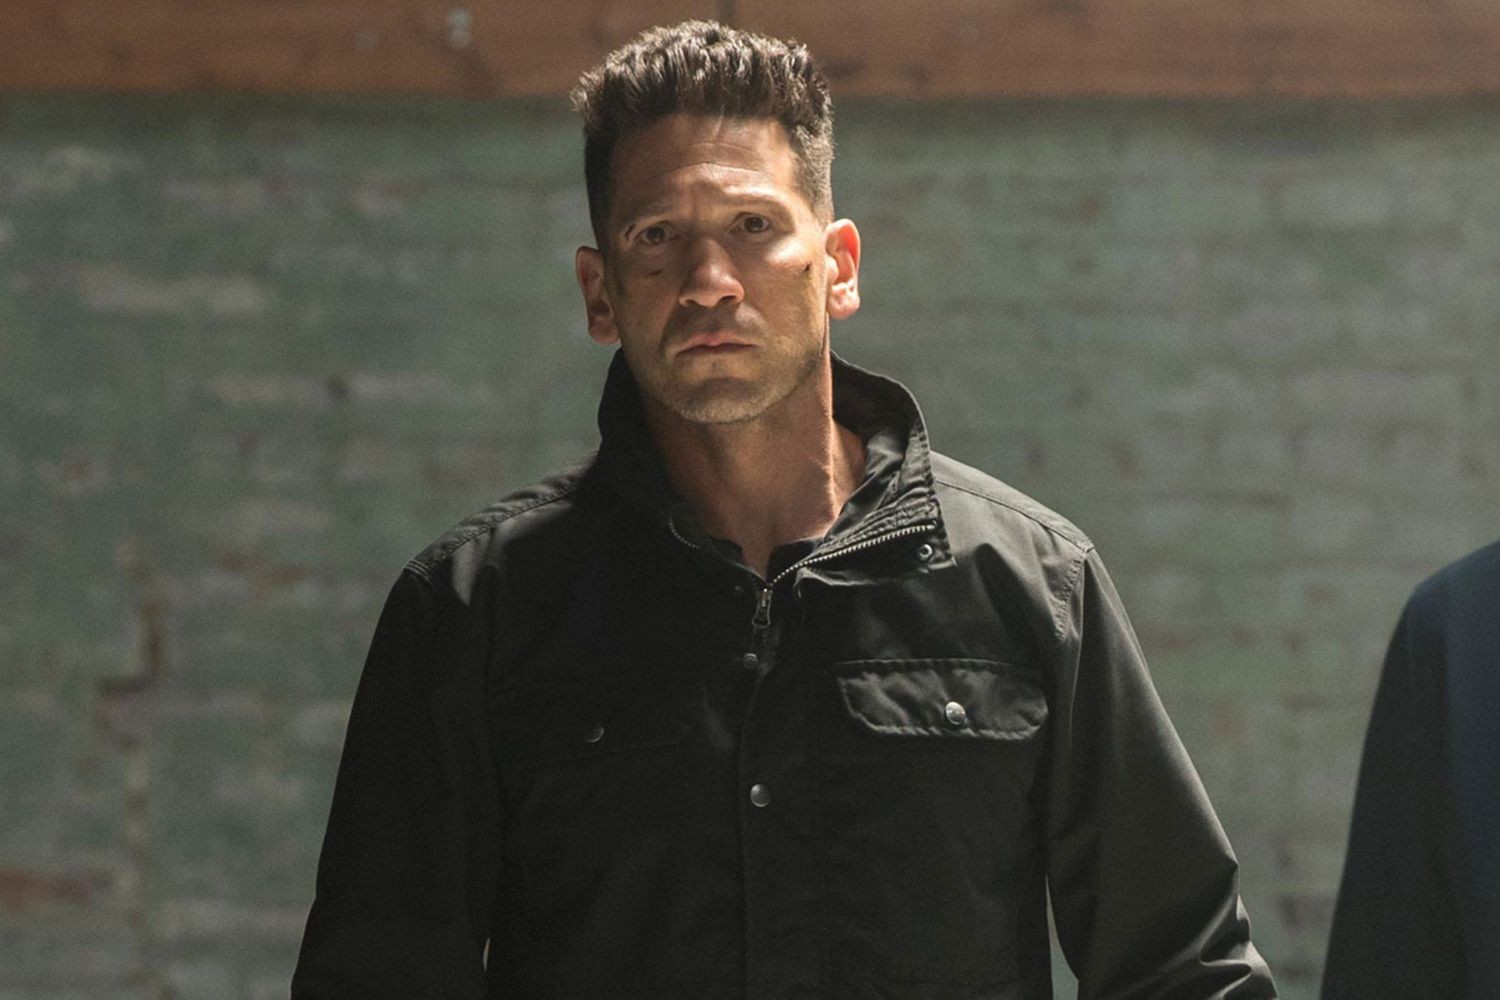 Jon Bernthal will be reprising his role after two beloved seasons of The Punisher